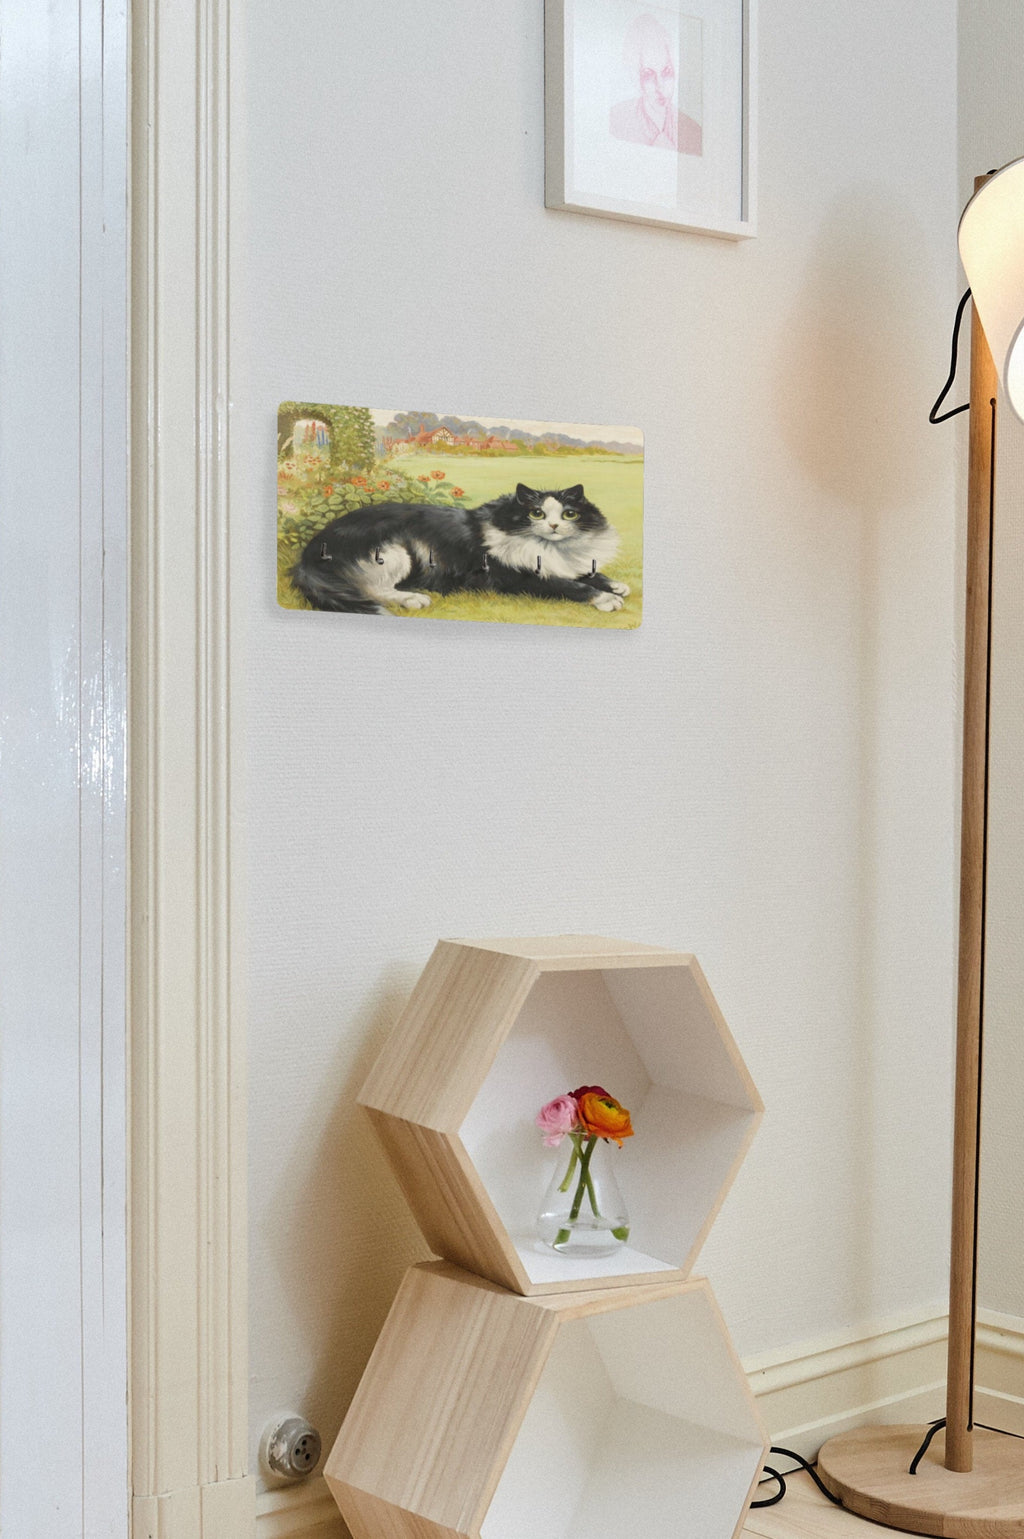 Resting Cat by Louis Wain Wall Mounted Decor Key Holder